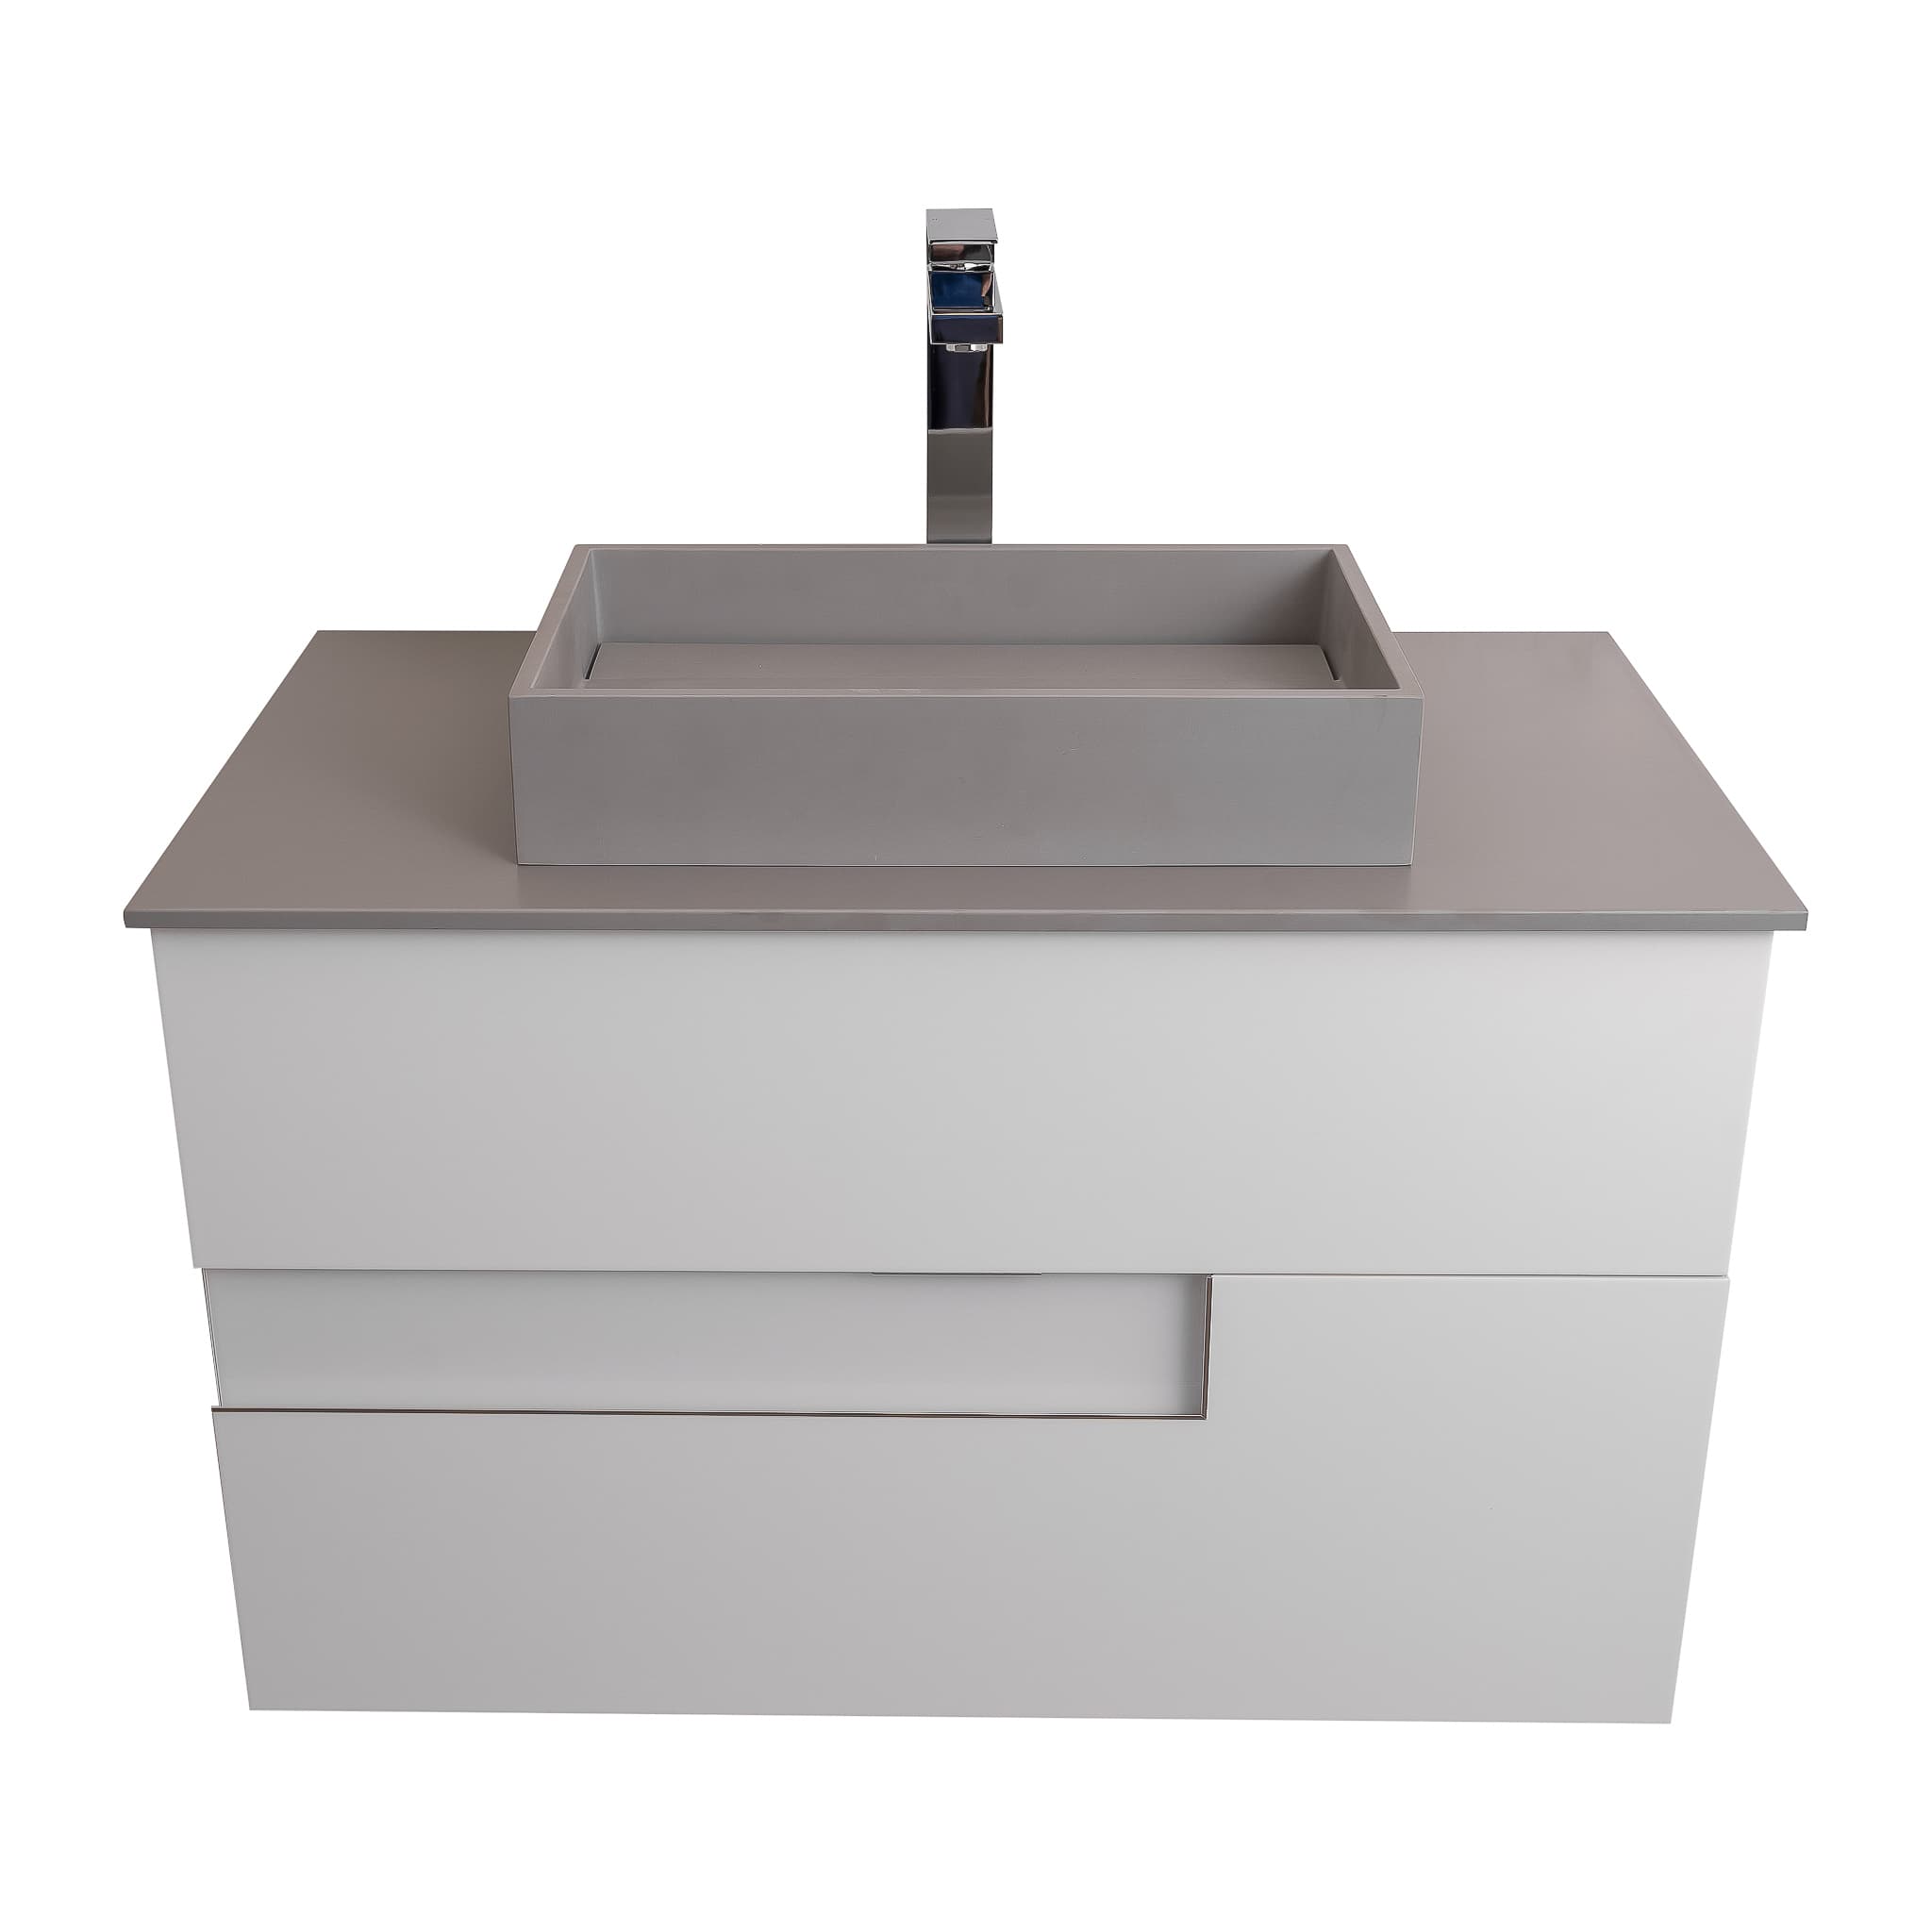 Vision 39.5 White High Gloss Cabinet, Solid Surface Flat Grey Counter And Infinity Square Solid Surface Grey Basin 1329, Wall Mounted Modern Vanity Set